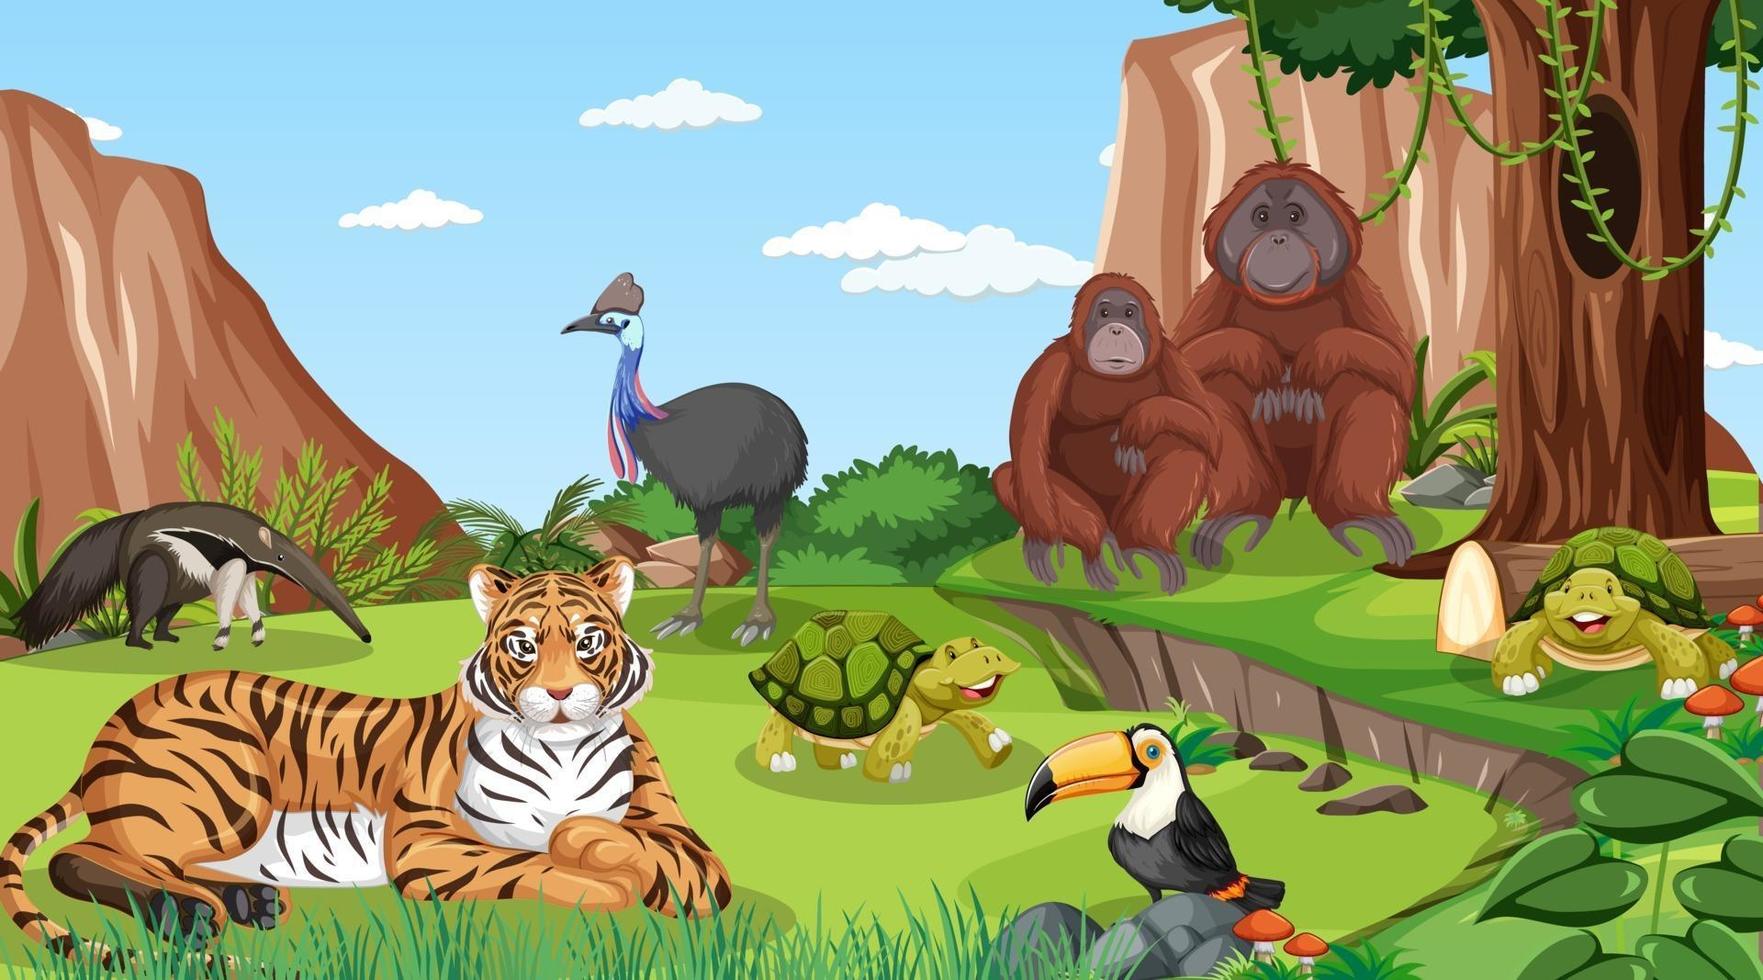 A tiger with otther wild animals in forest scene vector